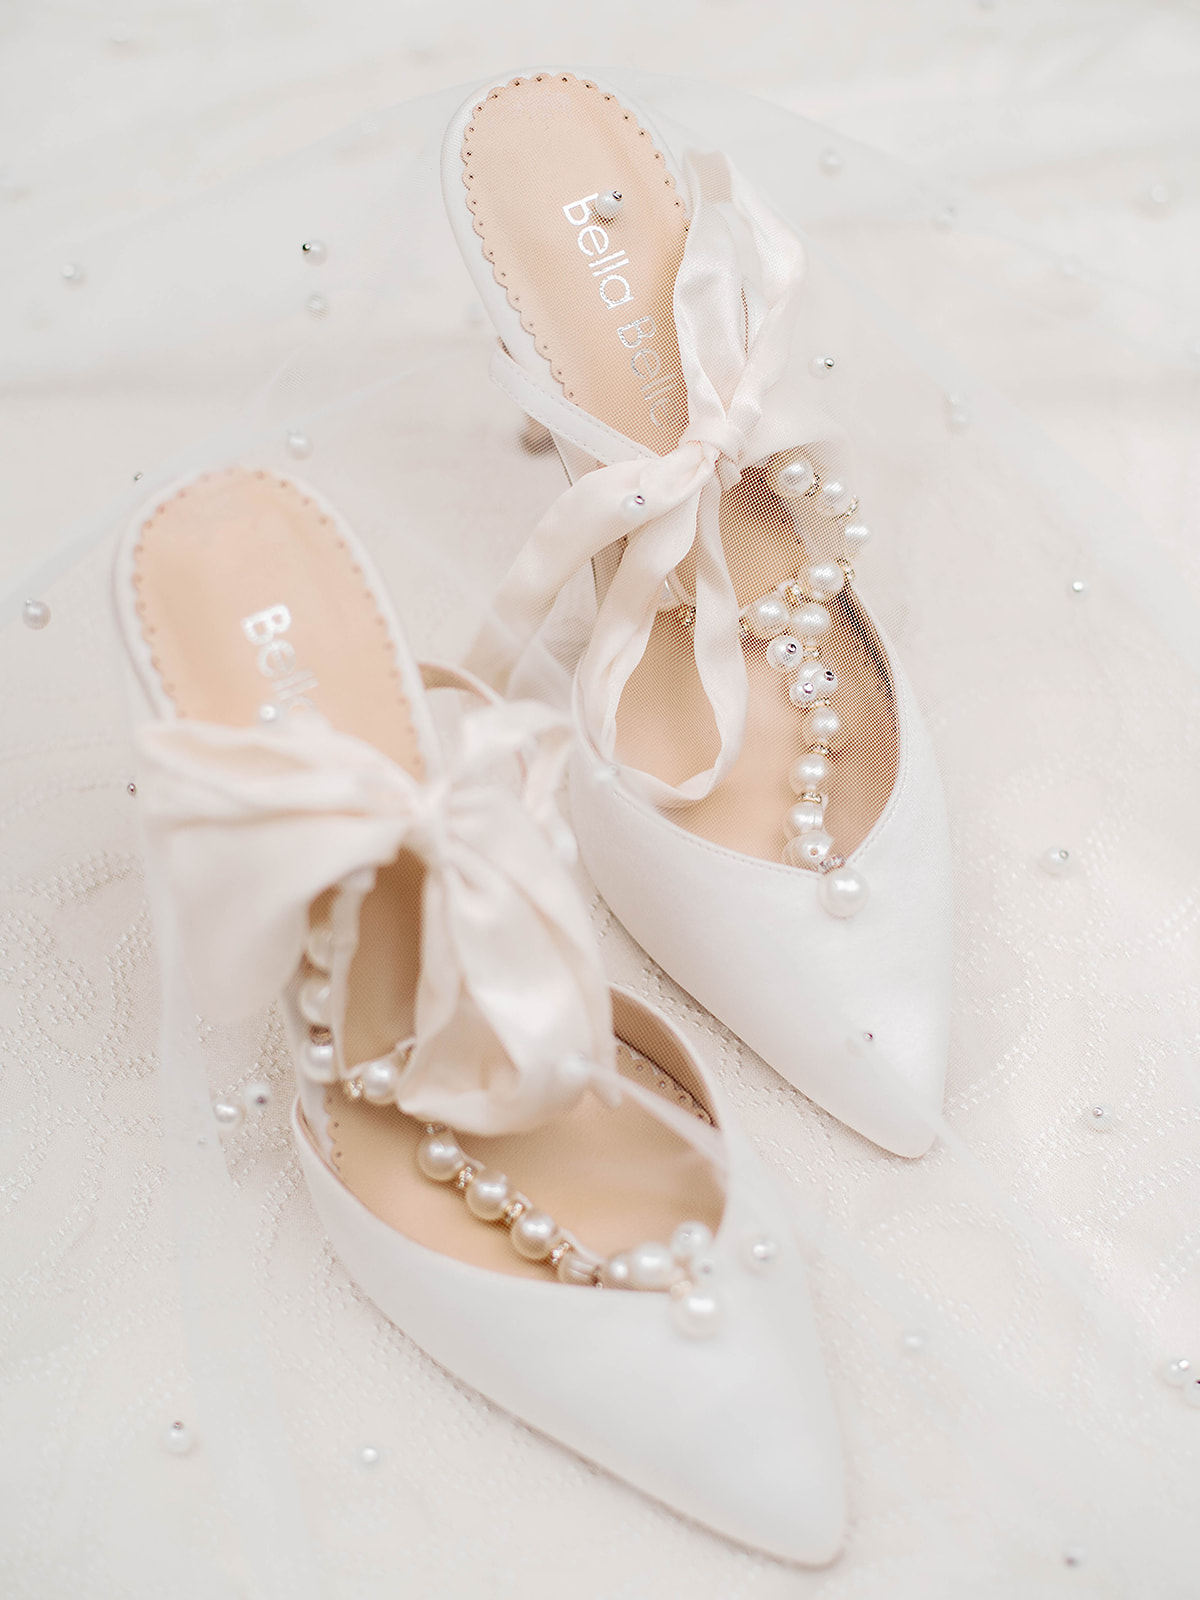 White and Pearl Royal Inspired high heel wedding shoes